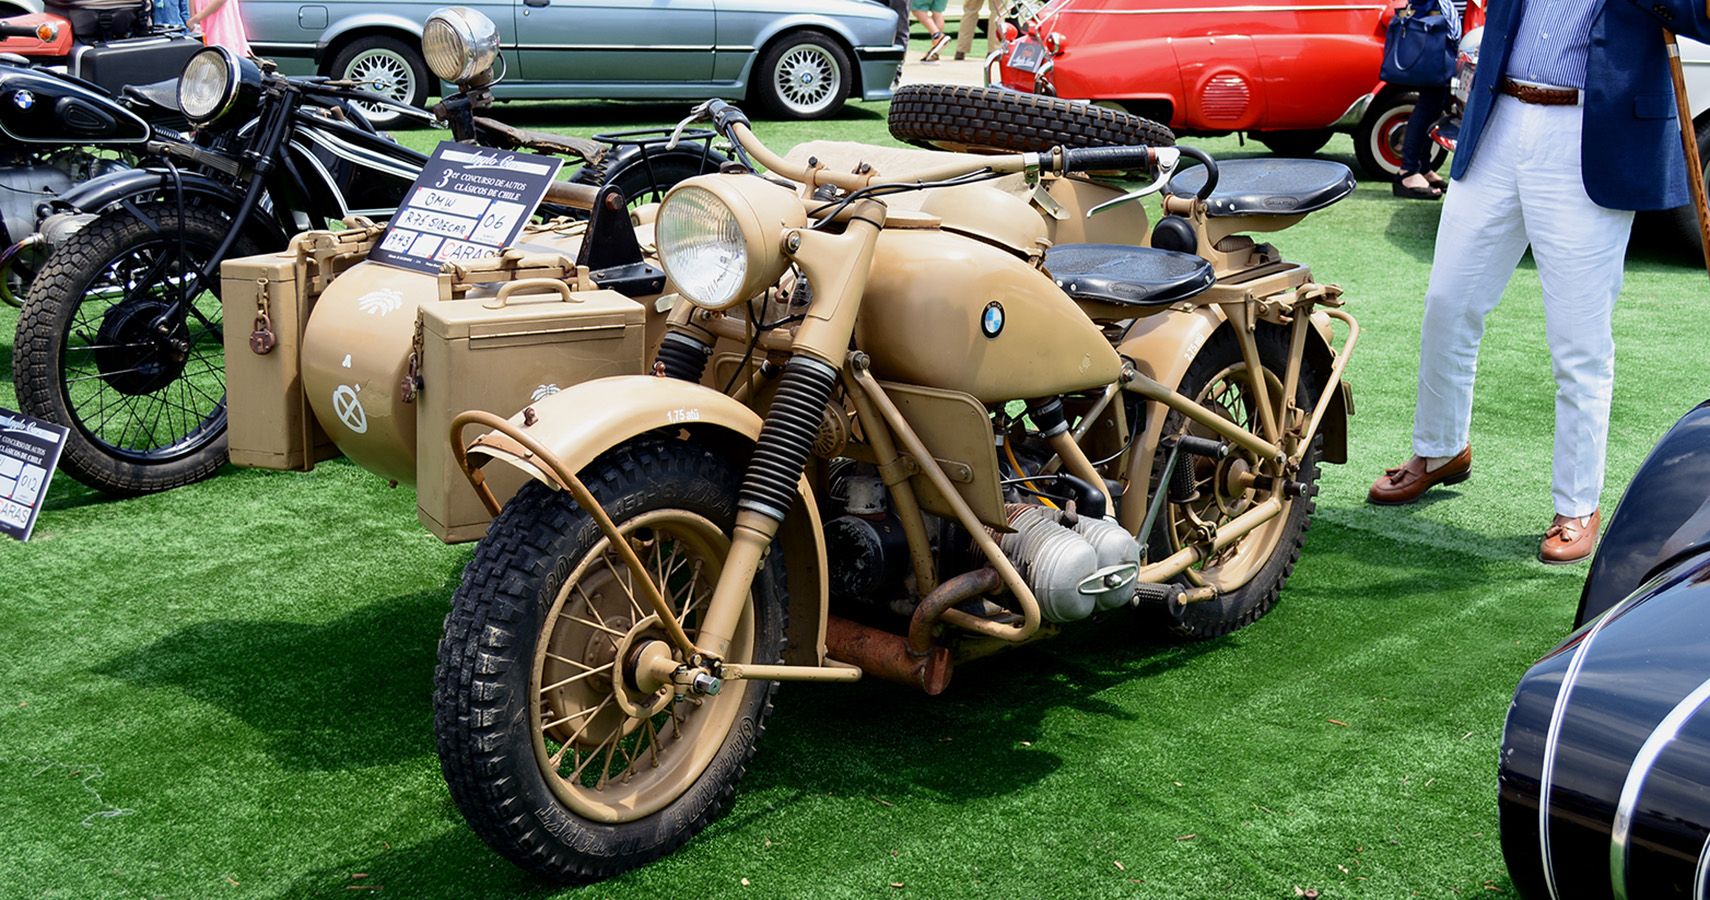 Production Of The BMW R75 Started In 1940 And Ceased In 1944, With Over 16,000 Units Produced